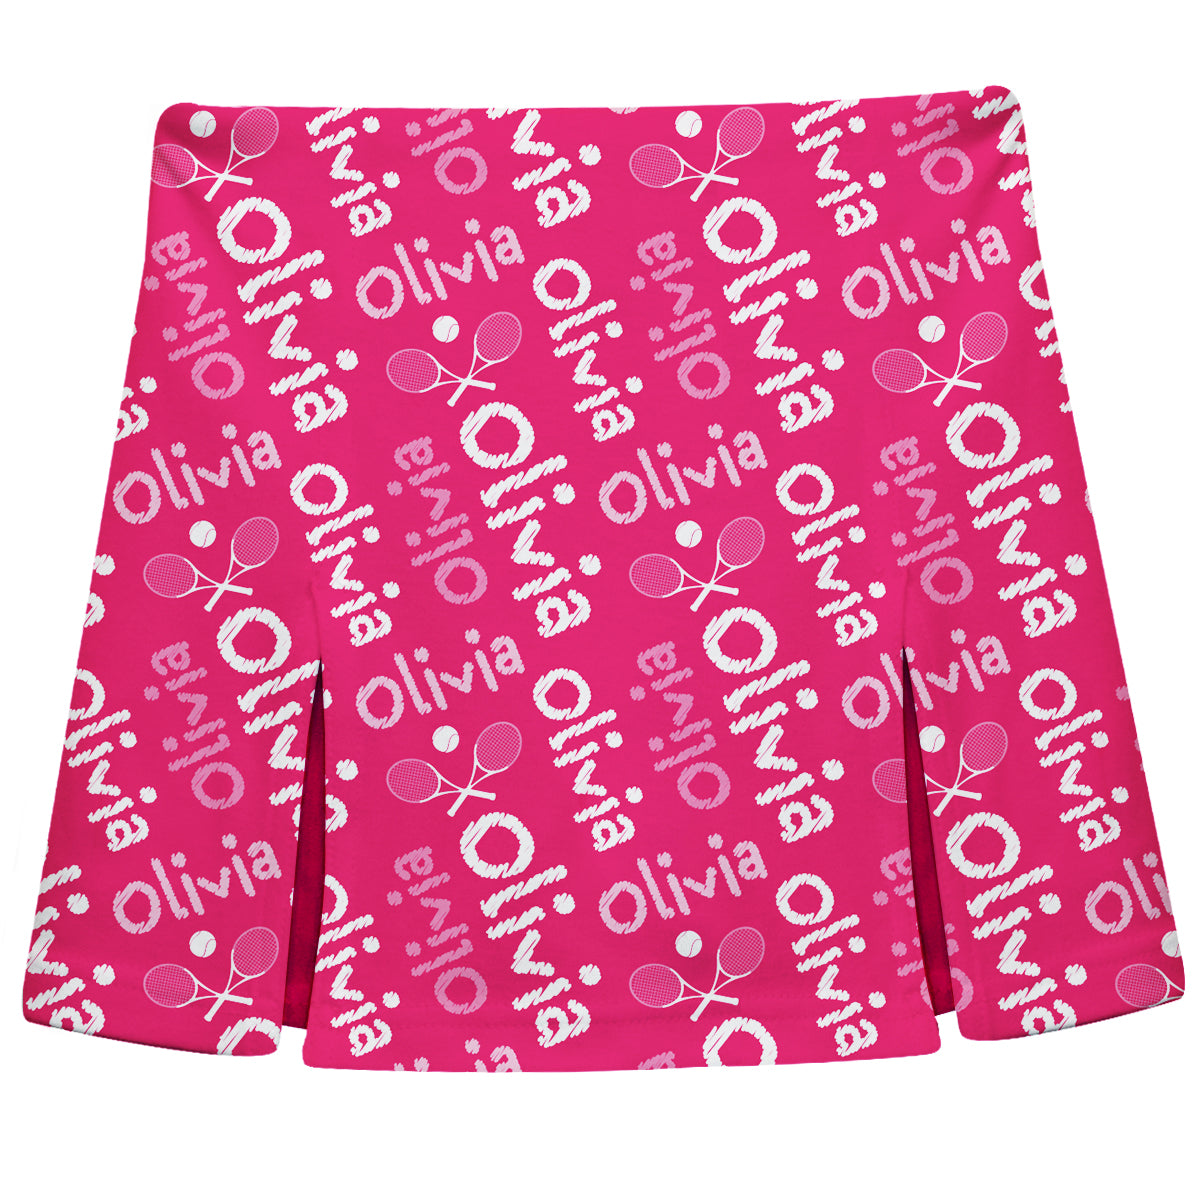 Tennis and Personalized Name Print Hot Pink Skort